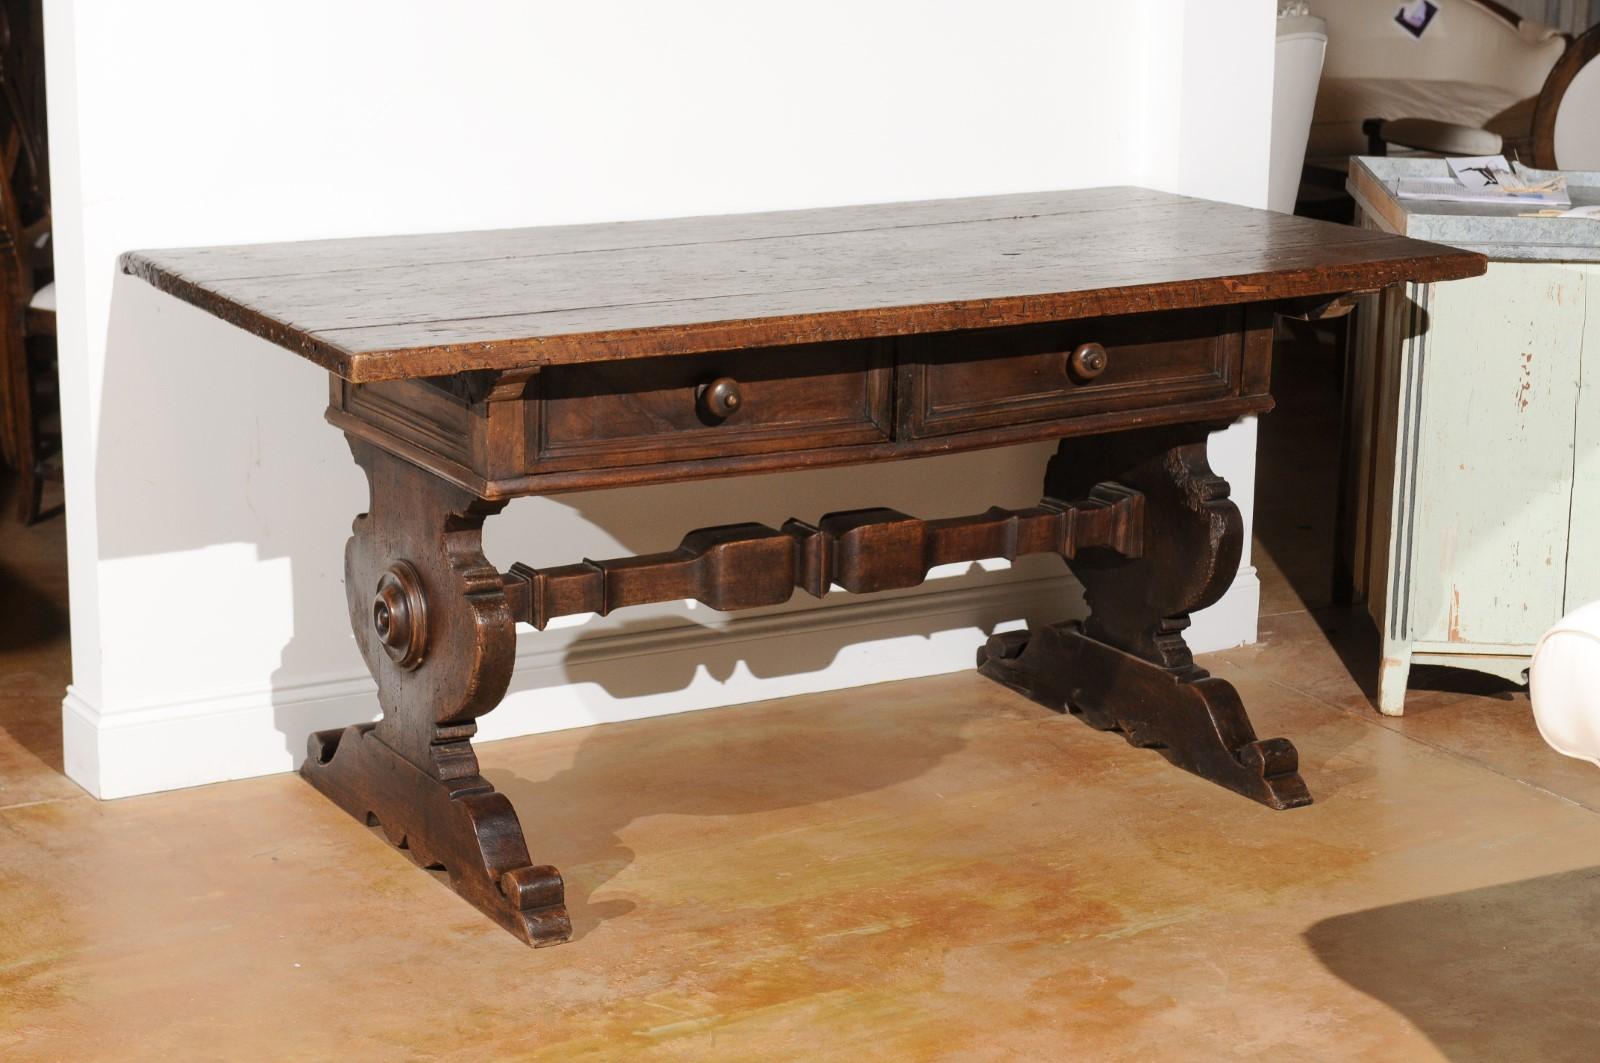 An Italian Baroque style 19th century walnut table from the Italian Alps with drawers and trestle base. Born in the Italian Alps during the 19th century, this exquisite table features a rectangular planked top sitting above two drawers fitted with